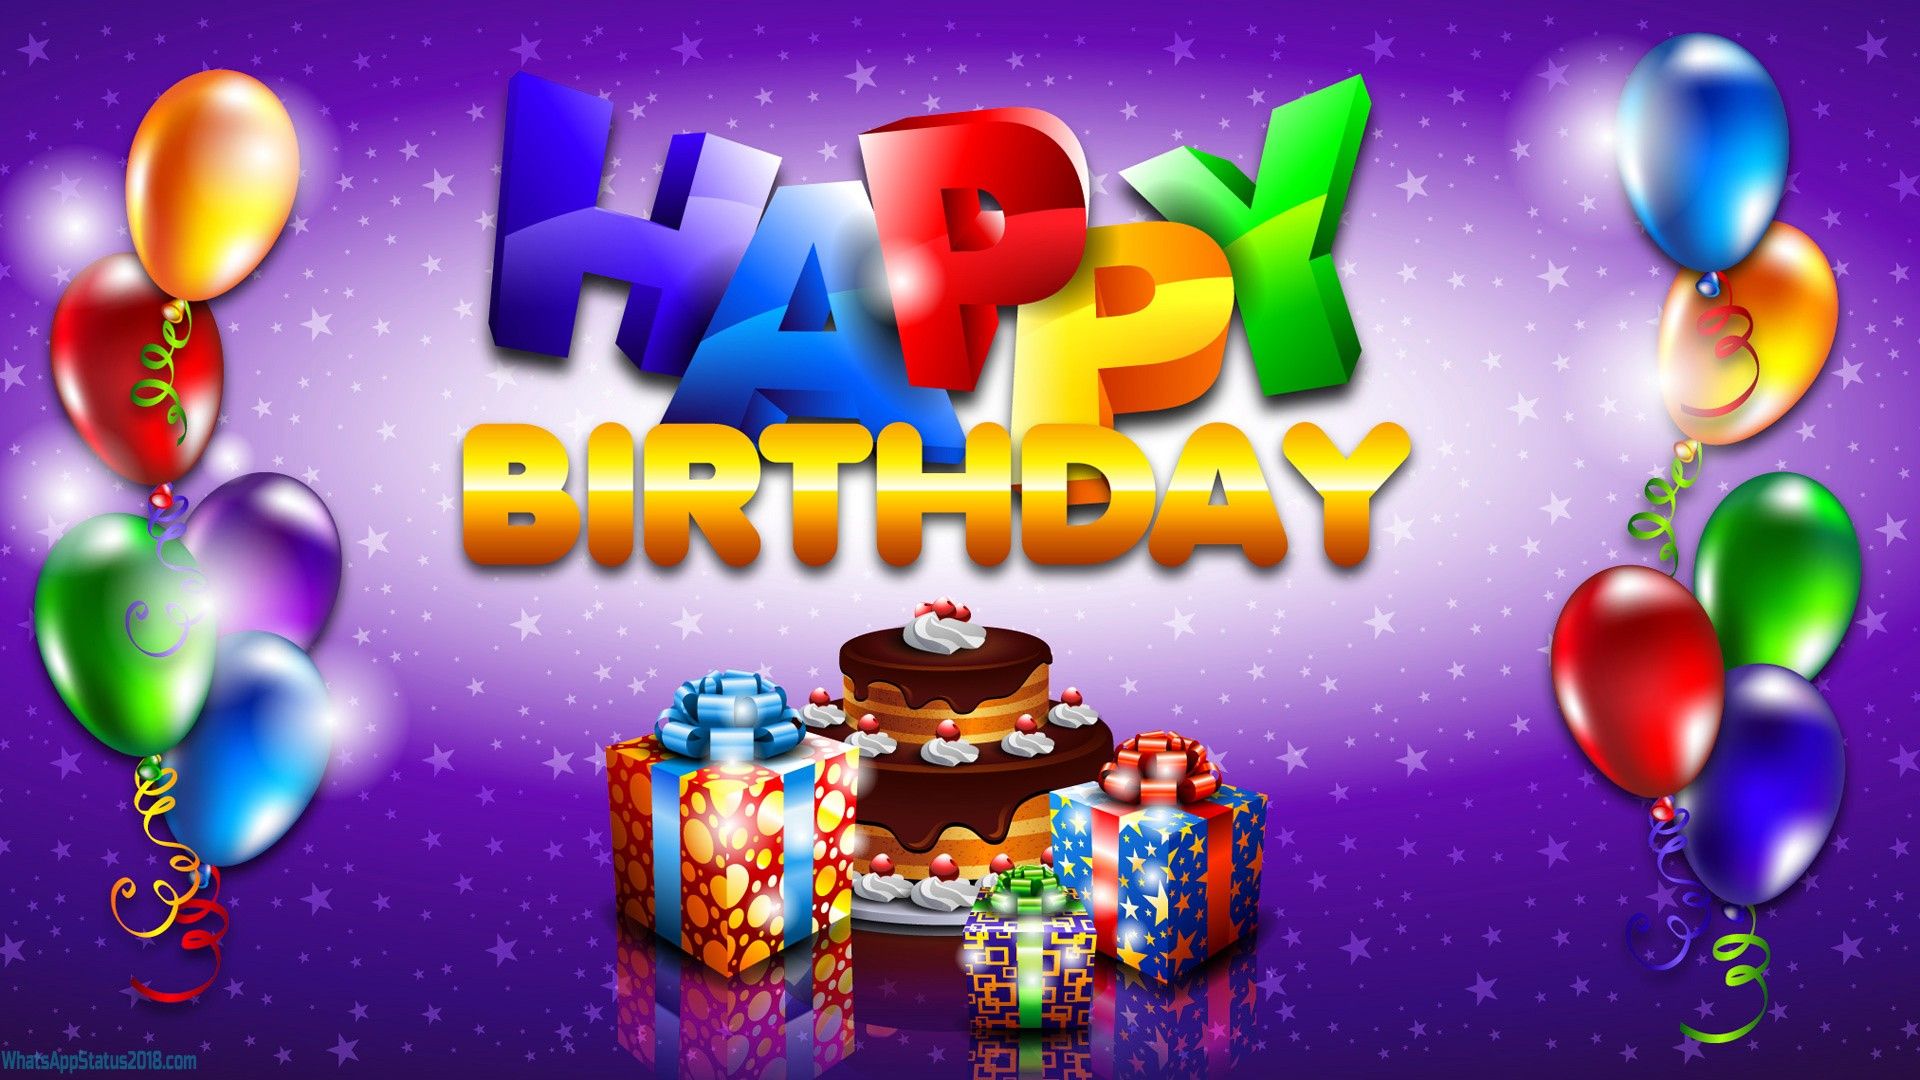 Best Happy Birthday Wishes Image Wallpaper. Bday Wishes. Birthday Cards Image